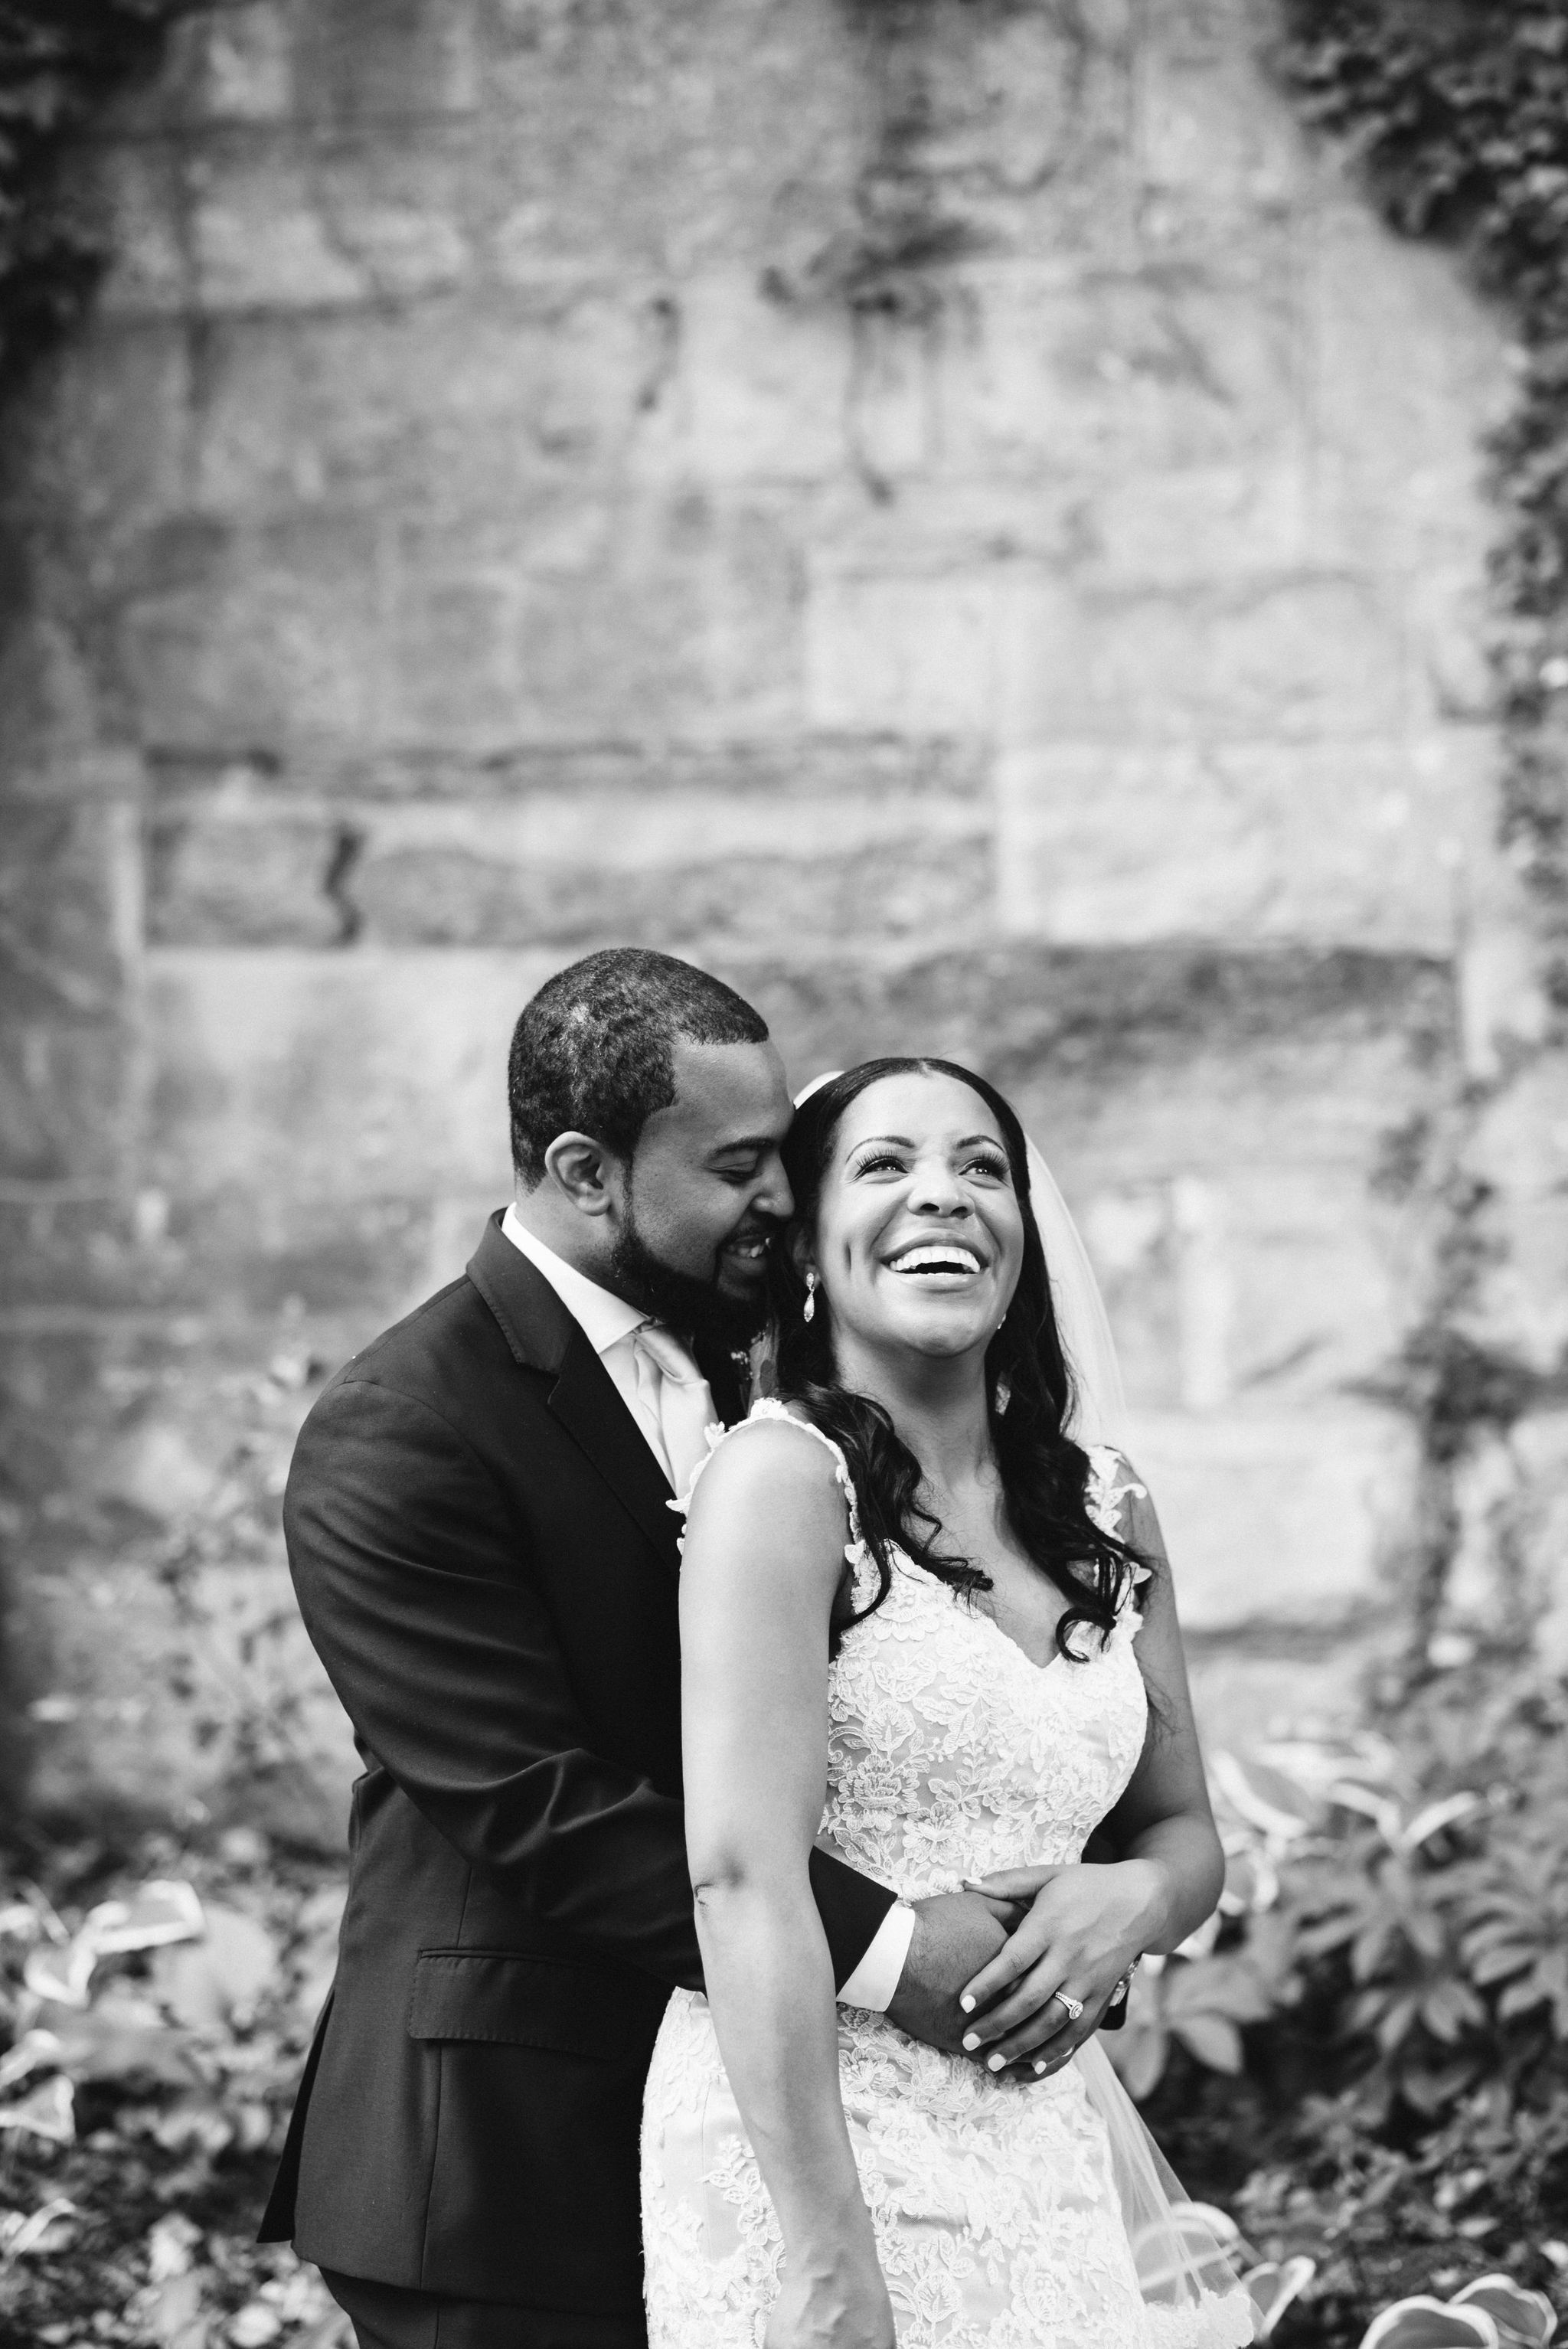  Baltimore, Maryland Wedding Photographer, Mount Vernon, Chase Court, Classic, Outdoor Ceremony, Garden, Romantic, Bride and groom Smiling and Hugging, Black and White Photo, Lace Wedding Dress 